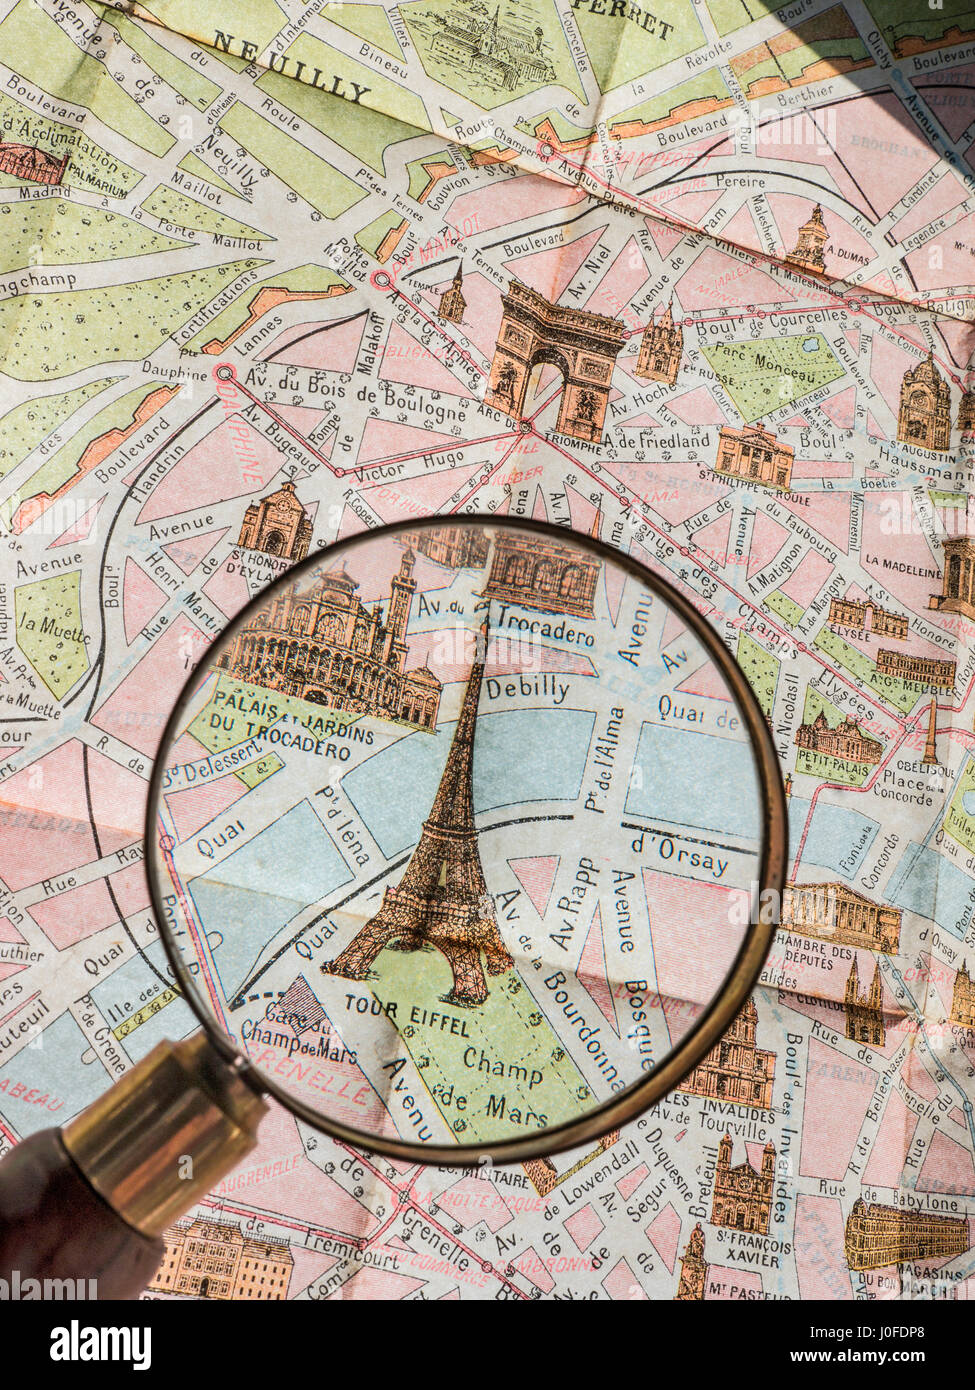 EIFFEL TOWER PARIS OLD Magnifying Glass on detail of rare 1900's vintage retro colour Monumental Map of Paris, featuring Eiffel Tower & Trocadero etc Stock Photo